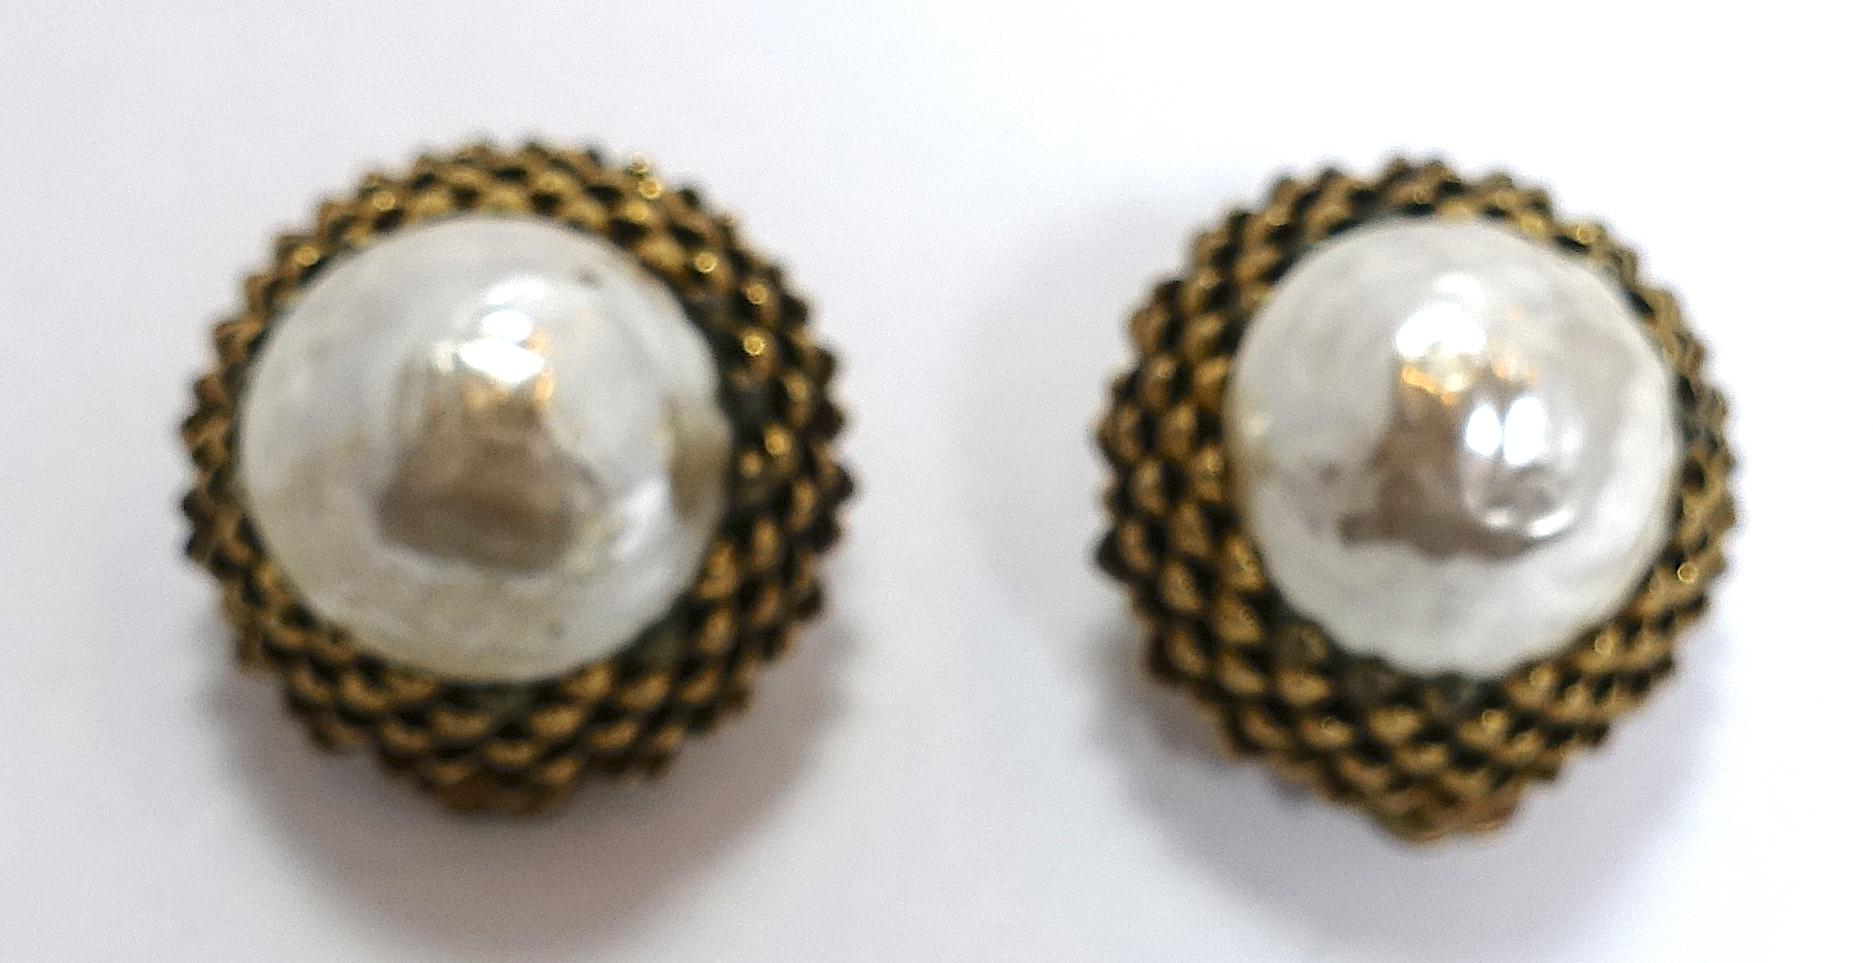 These vintage signed Miriam Haskell earrings feature her famous acorn design.  It has a large baroque faux pearl in a gold tone setting.  These are the large, collectible clip earrings that  measure 1” across and are signed “Miriam Haskell”.  They